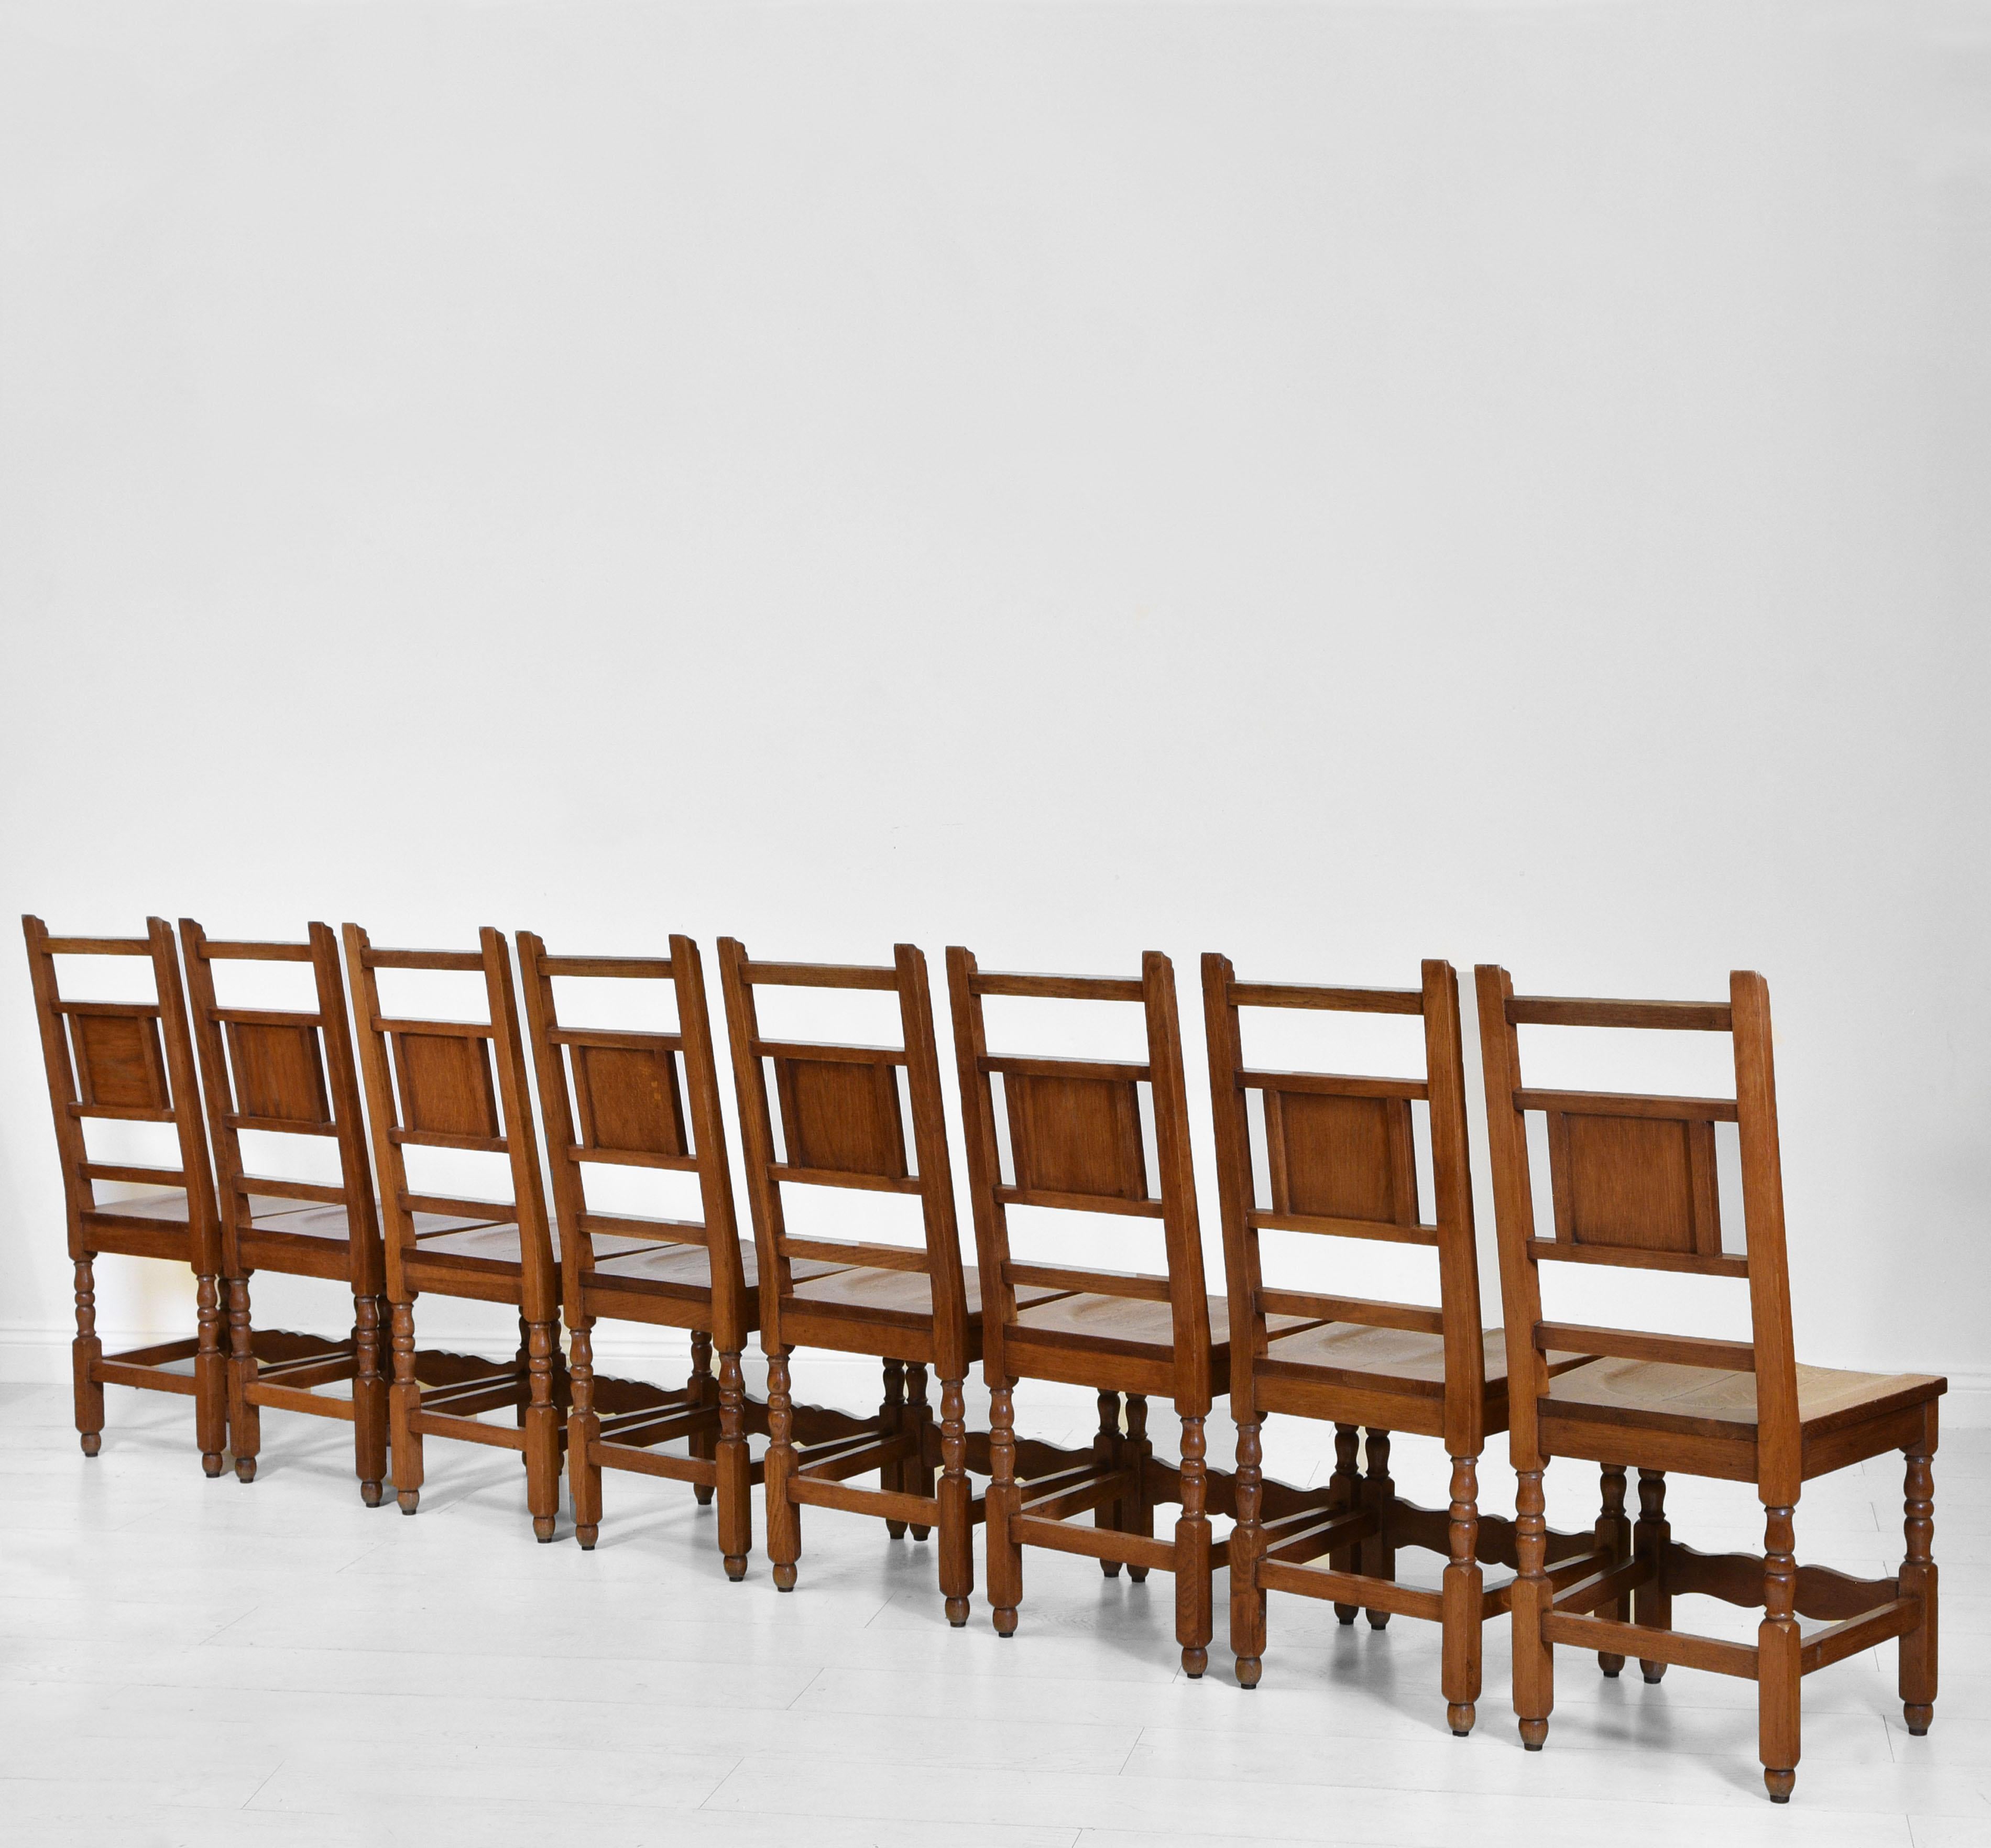 English Vintage 1930s Cambridge University Set of 8 Oak Dining Chairs For Sale